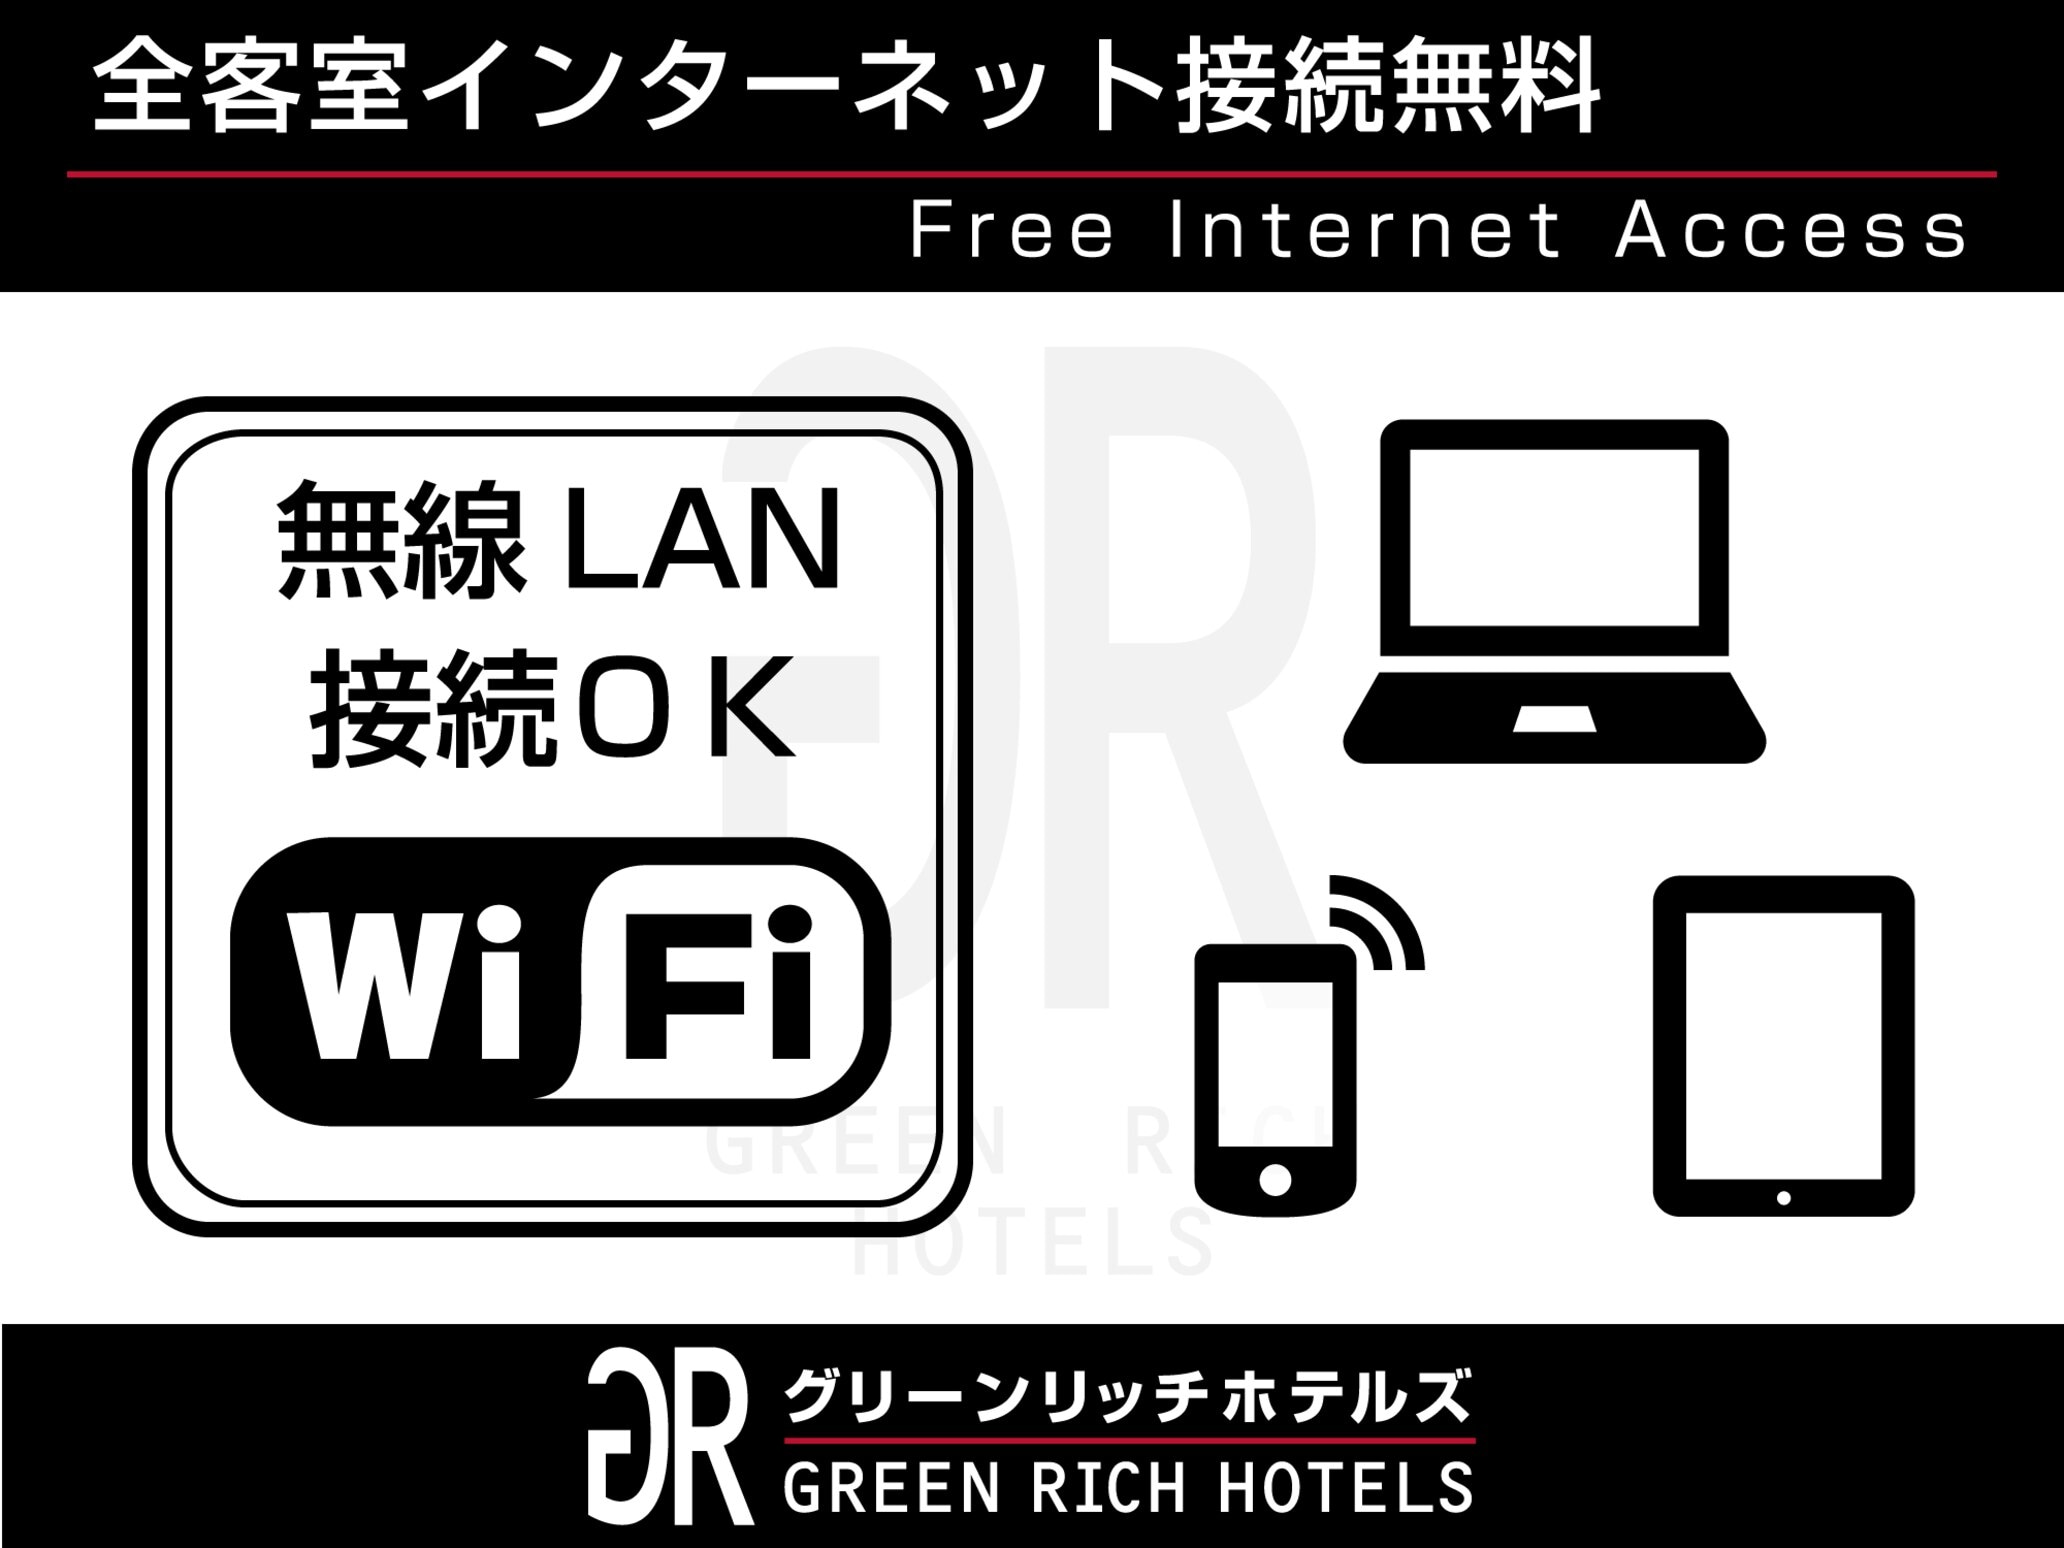 Guest room Wi-Fi information